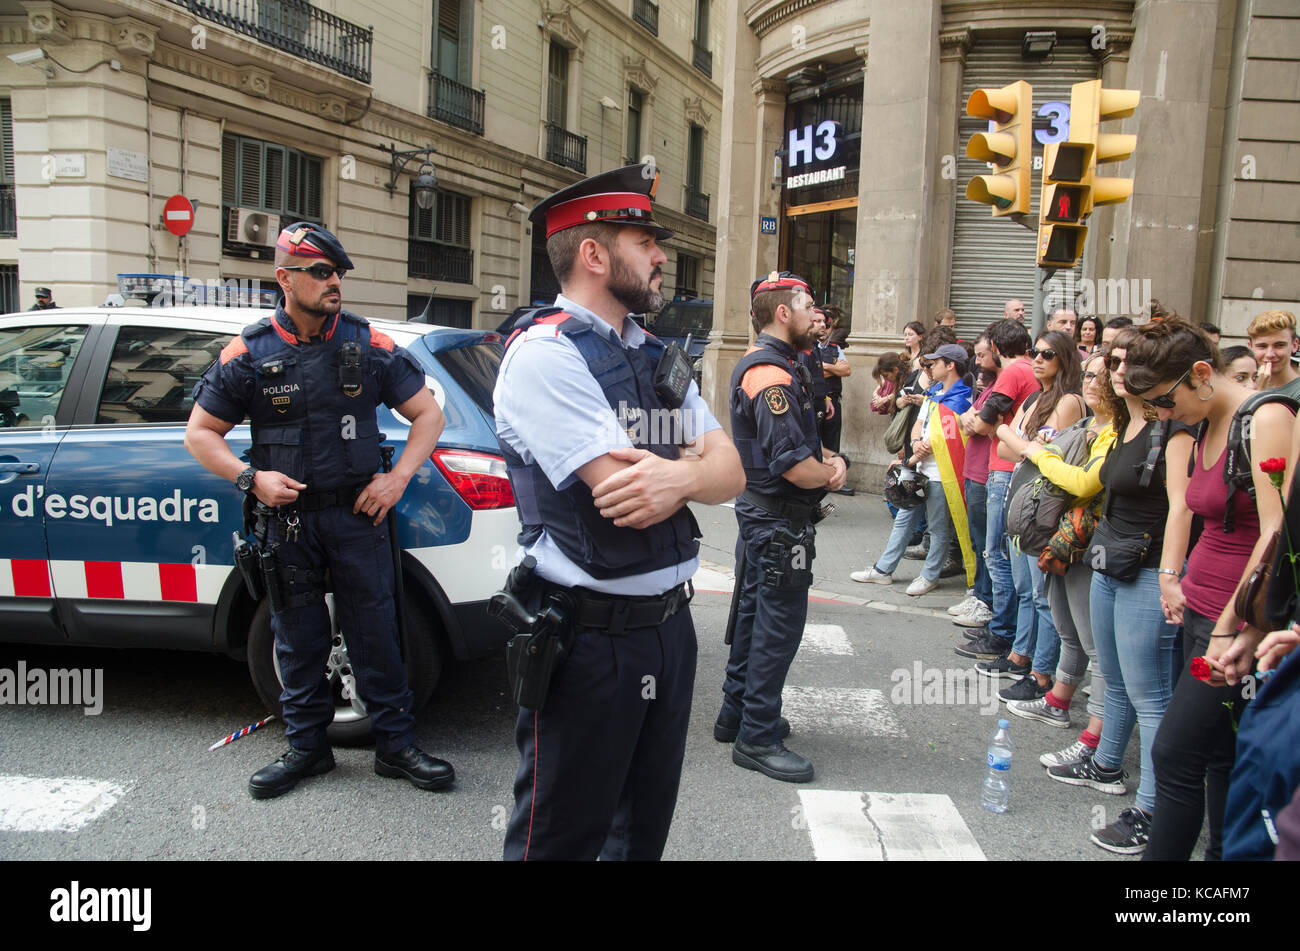 Barcelona, Spain. 3rd Oct, 2017. Local Catalonia police made a security cordon to protect the headquarters of the Spanish National police building. Continuous demonstrations are still carried out in the central artery of Barcelona, Via Laietana. The popular street passes in front of the Spanish national police headquarters in Barcelona. Stock Photo